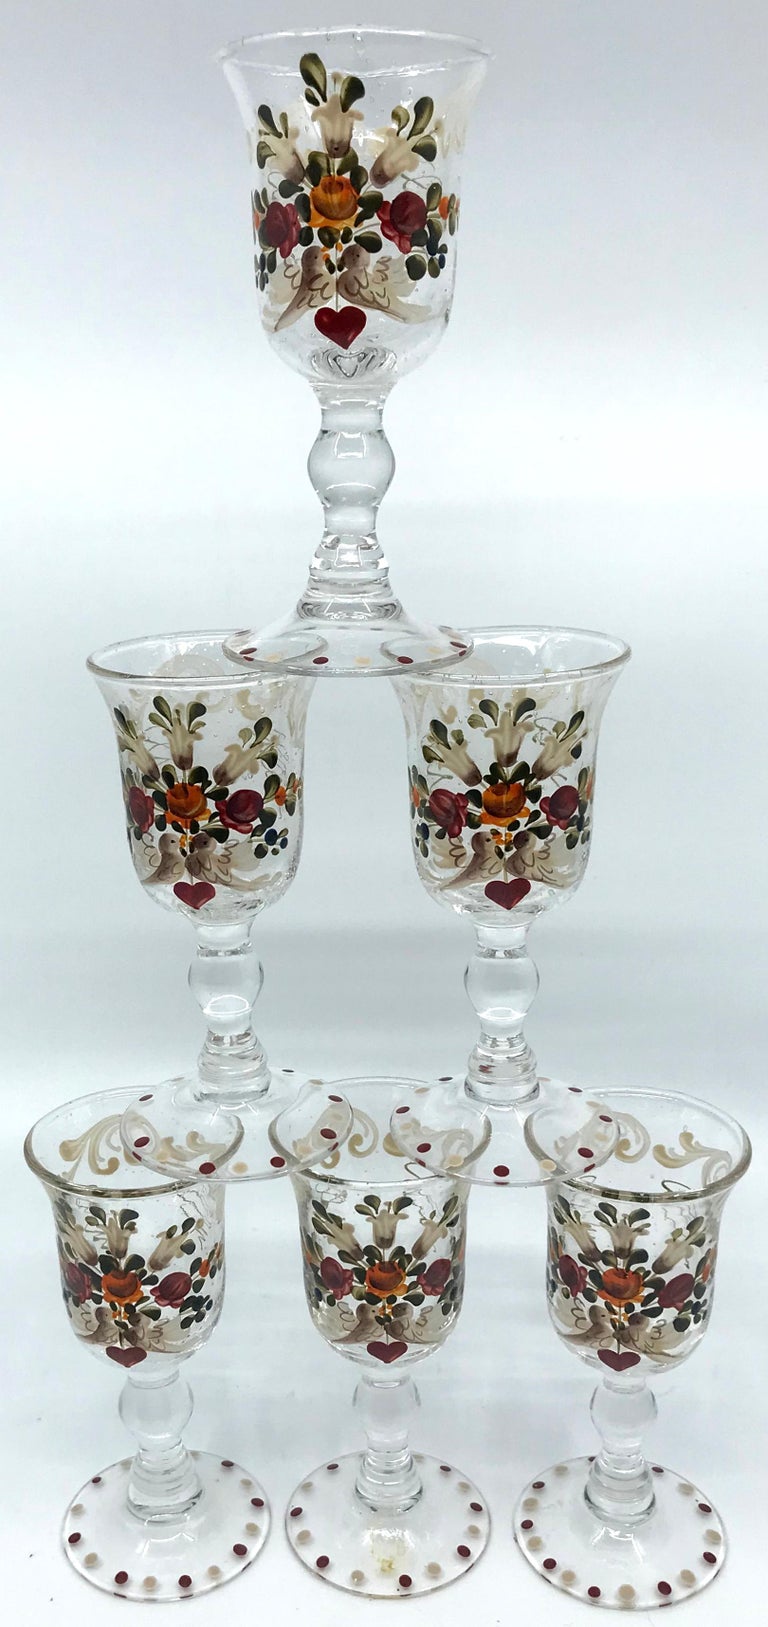 Set of six French painted sherry glasses. Antique set of clear glass baluster form glasses with hand paint and enameled design with floral spray of lilies centered with a pair of kissing doves joined by one heart with further floral sprays and